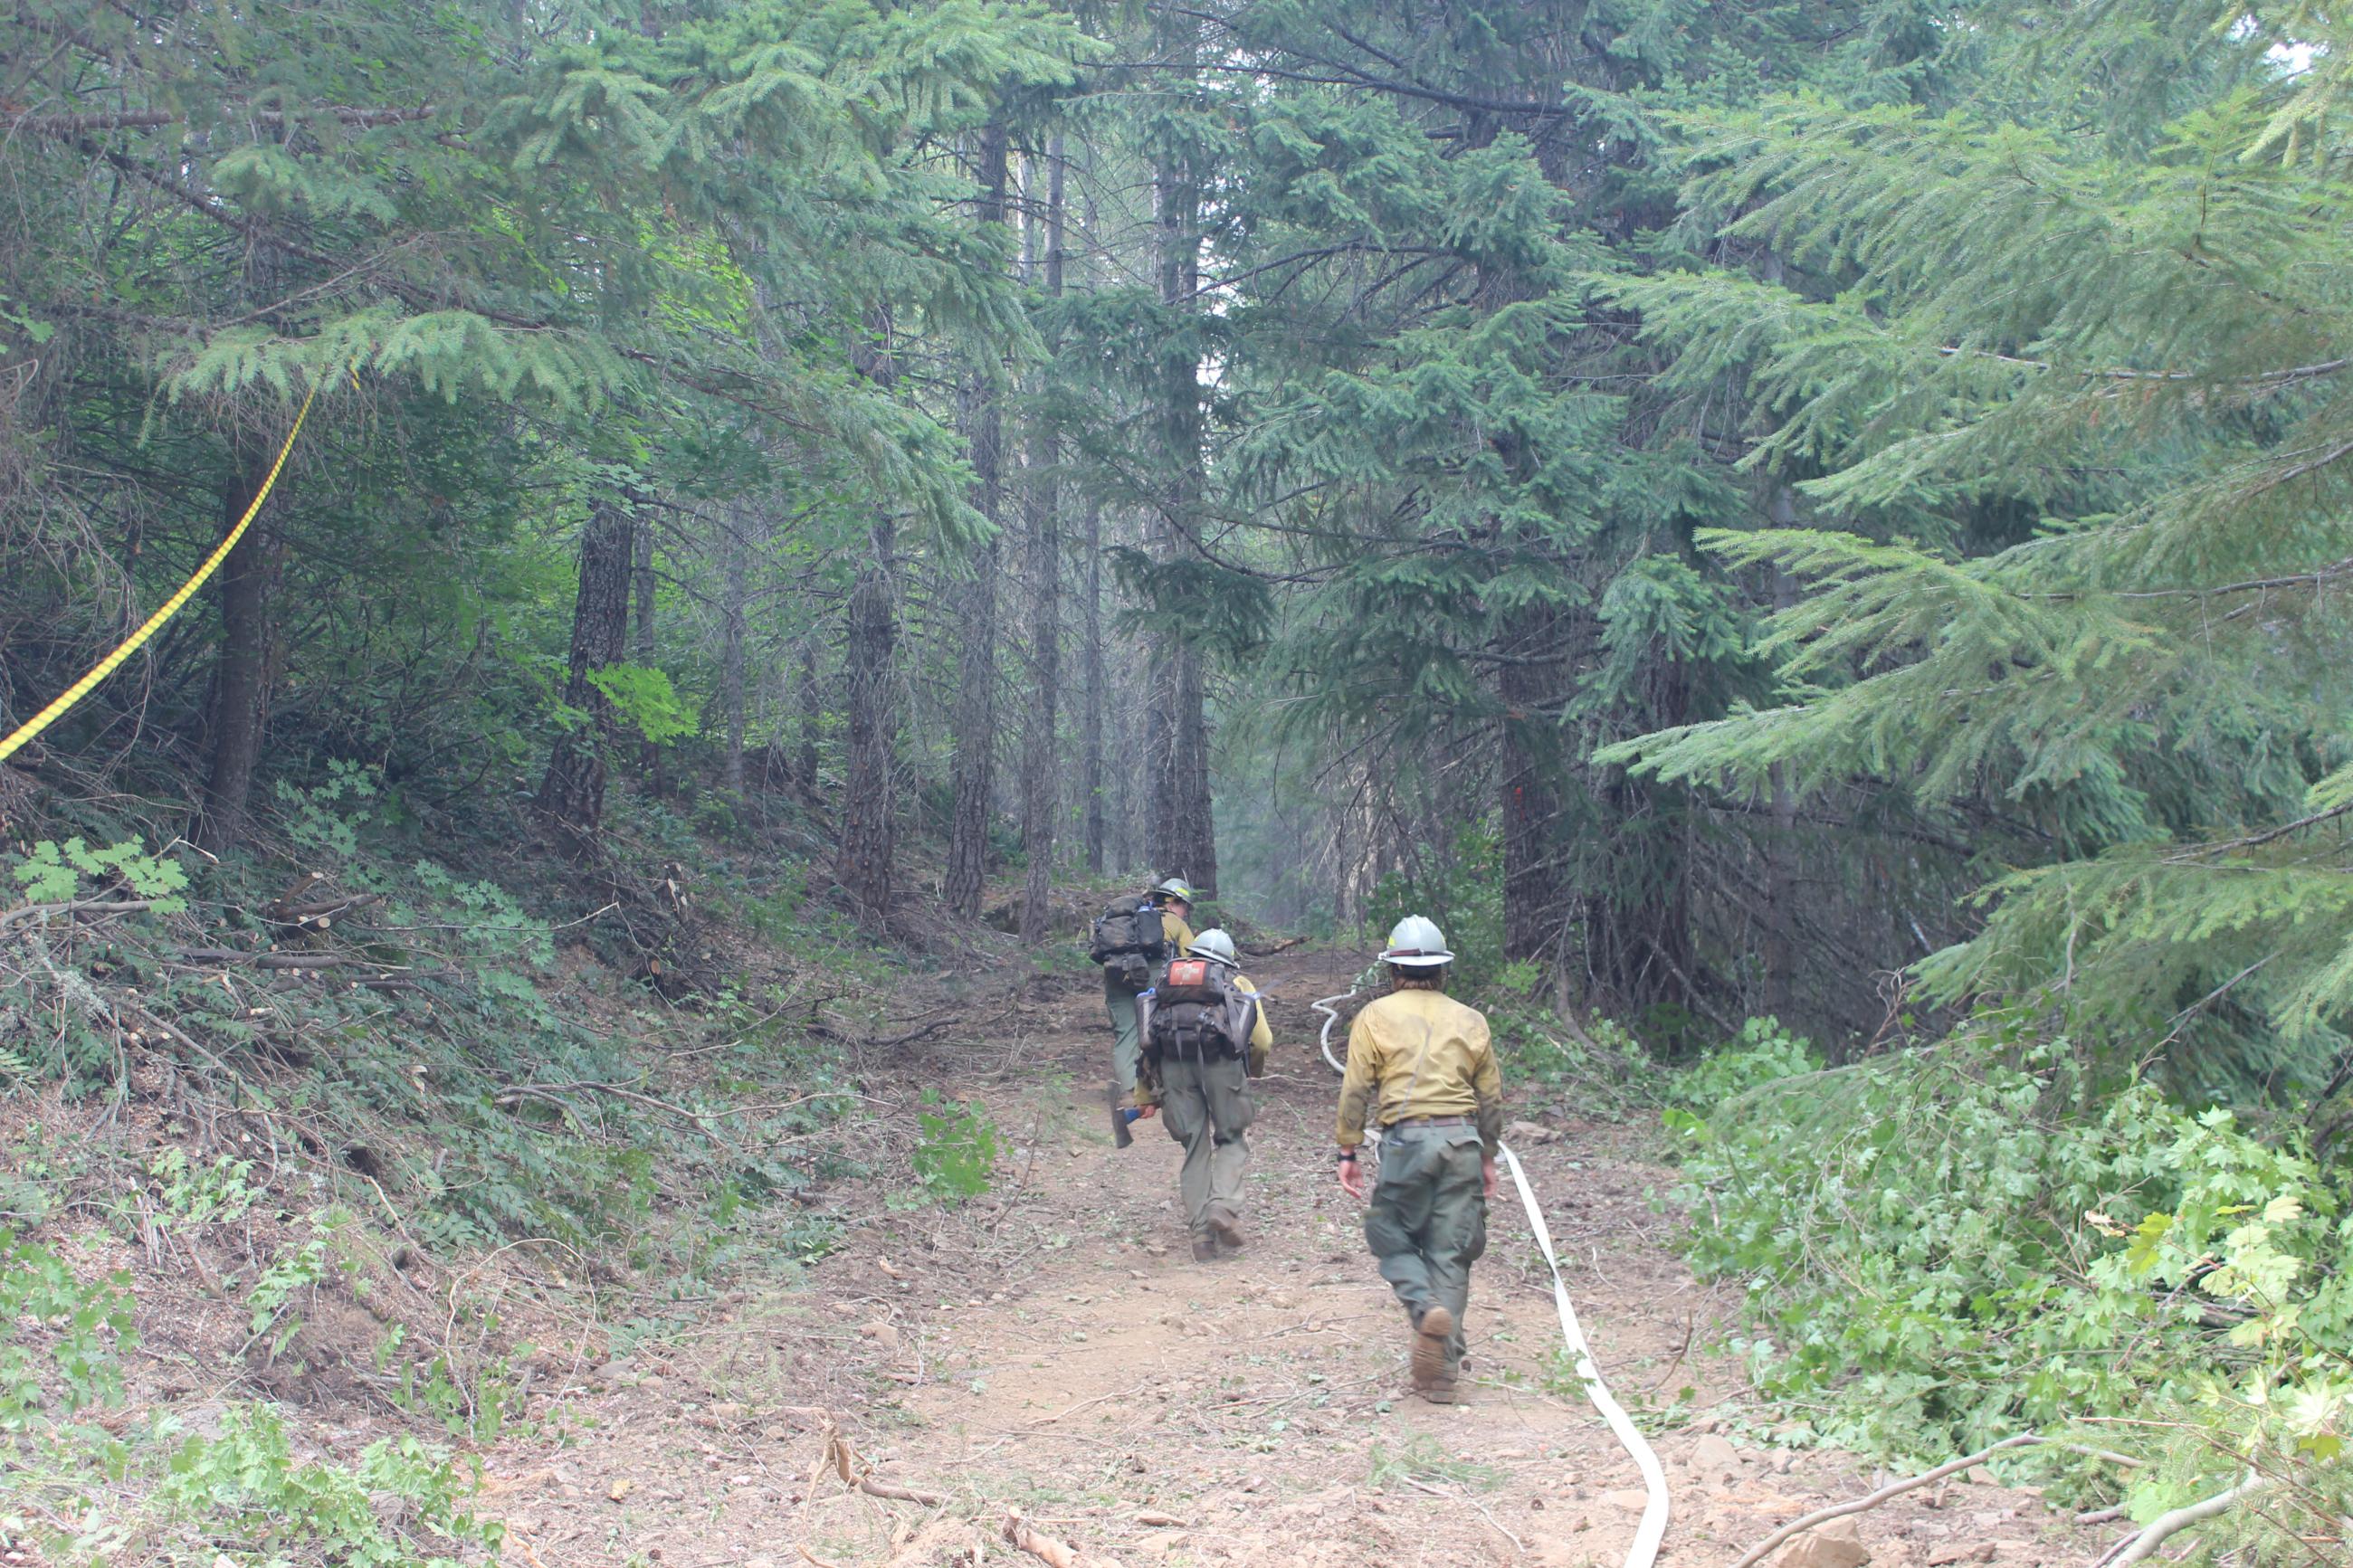 Three firefighters walk up a dusty dirt road along green trees